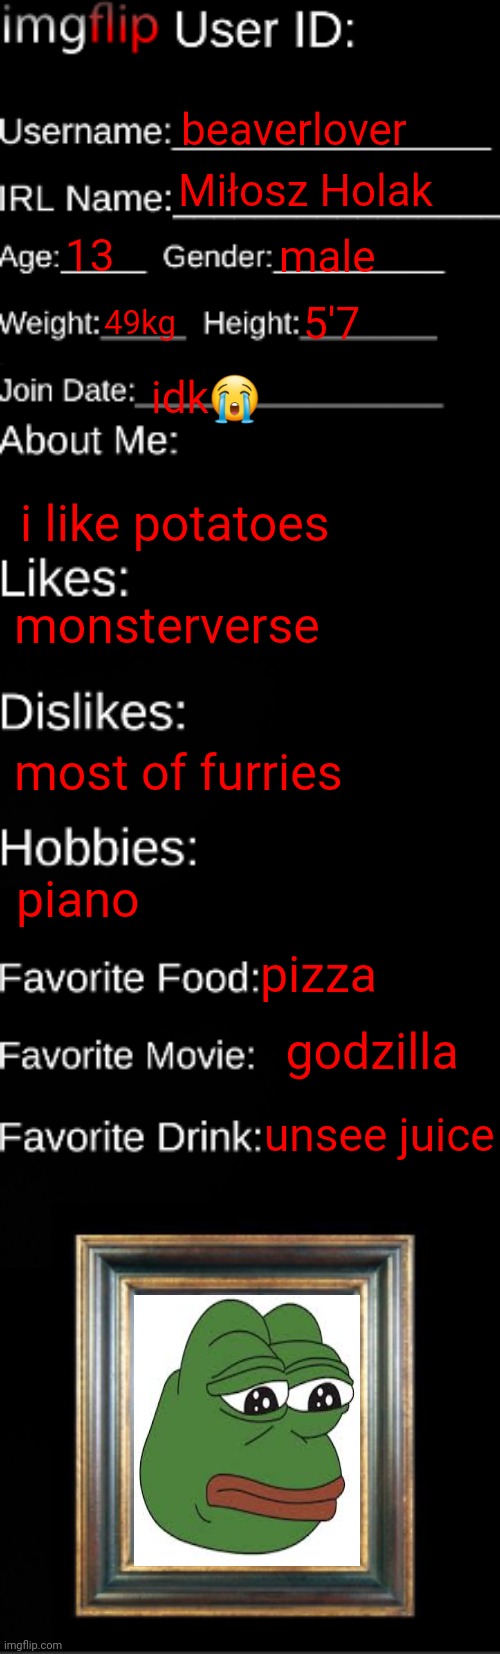 imgflip ID Card | beaverlover; Miłosz Holak; 13; male; 49kg; 5'7; idk😭; i like potatoes; monsterverse; most of furries; piano; pizza; godzilla; unsee juice | image tagged in imgflip id card | made w/ Imgflip meme maker